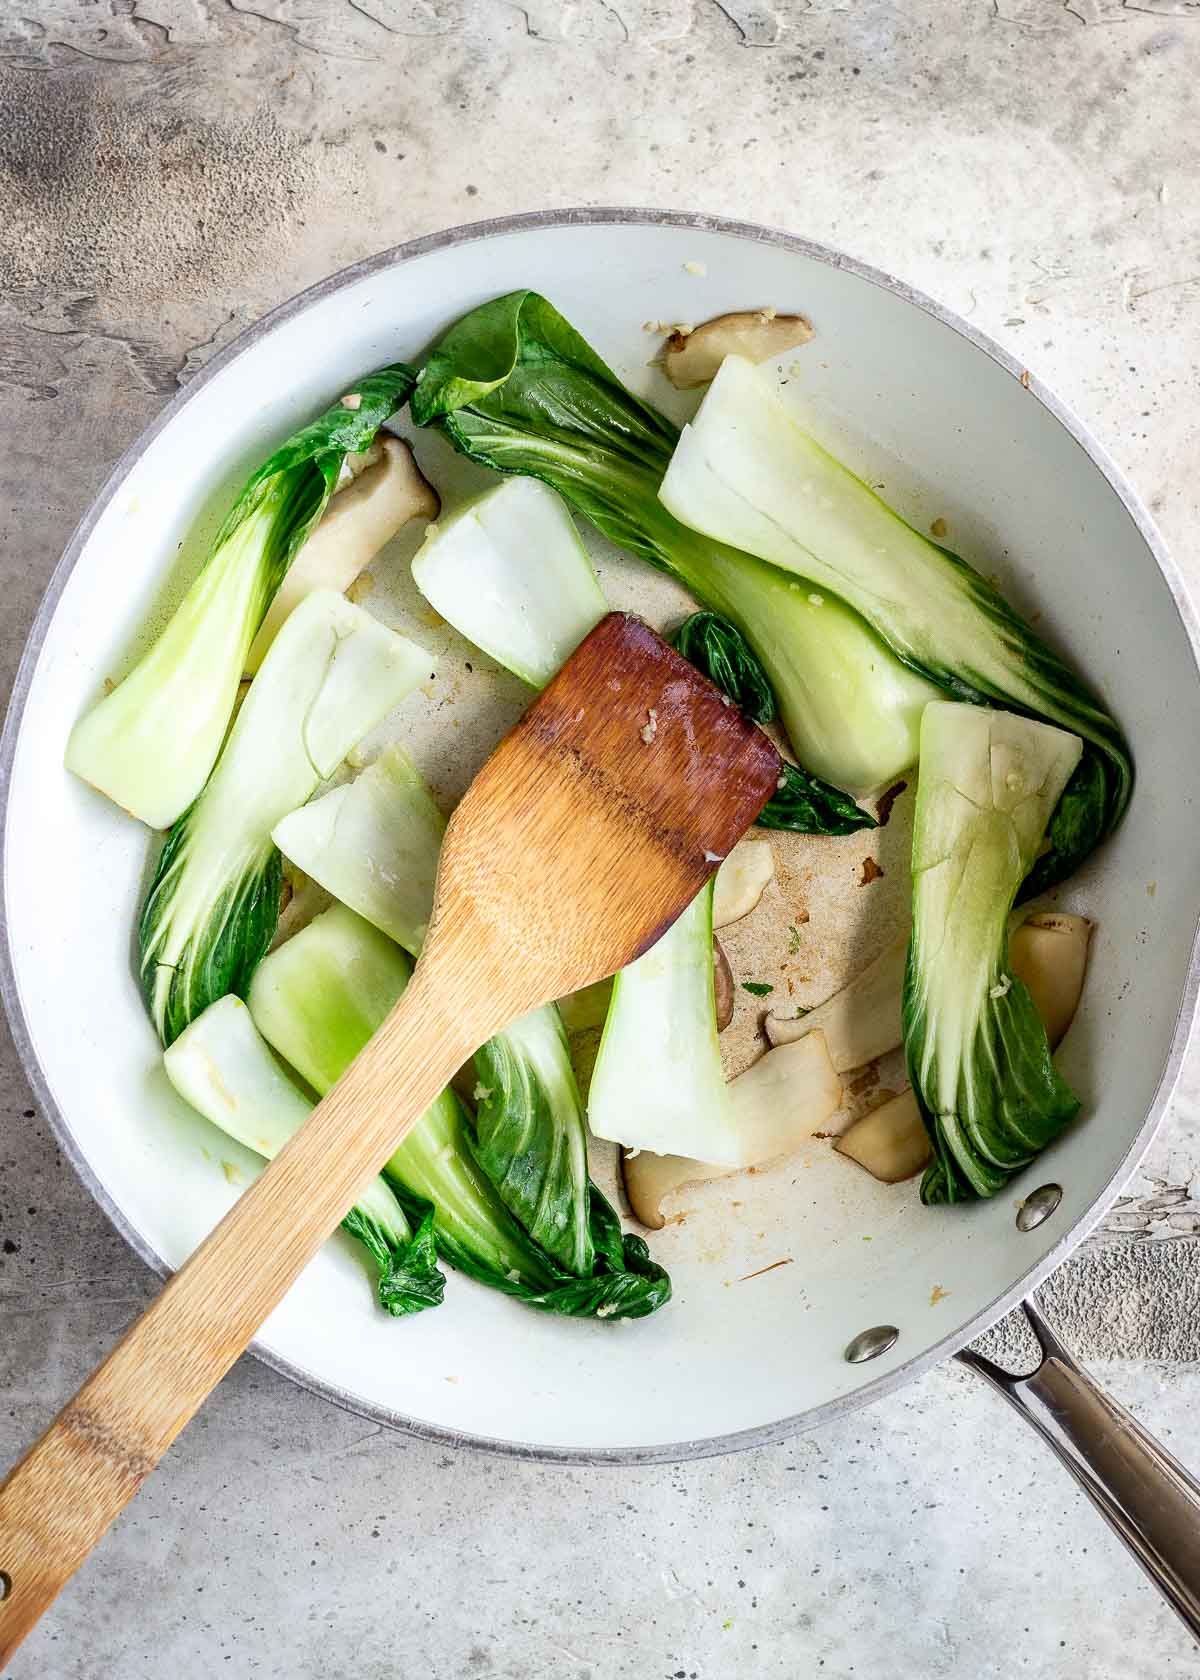 Bok choy and mushrooms being cooked together in a white wok.